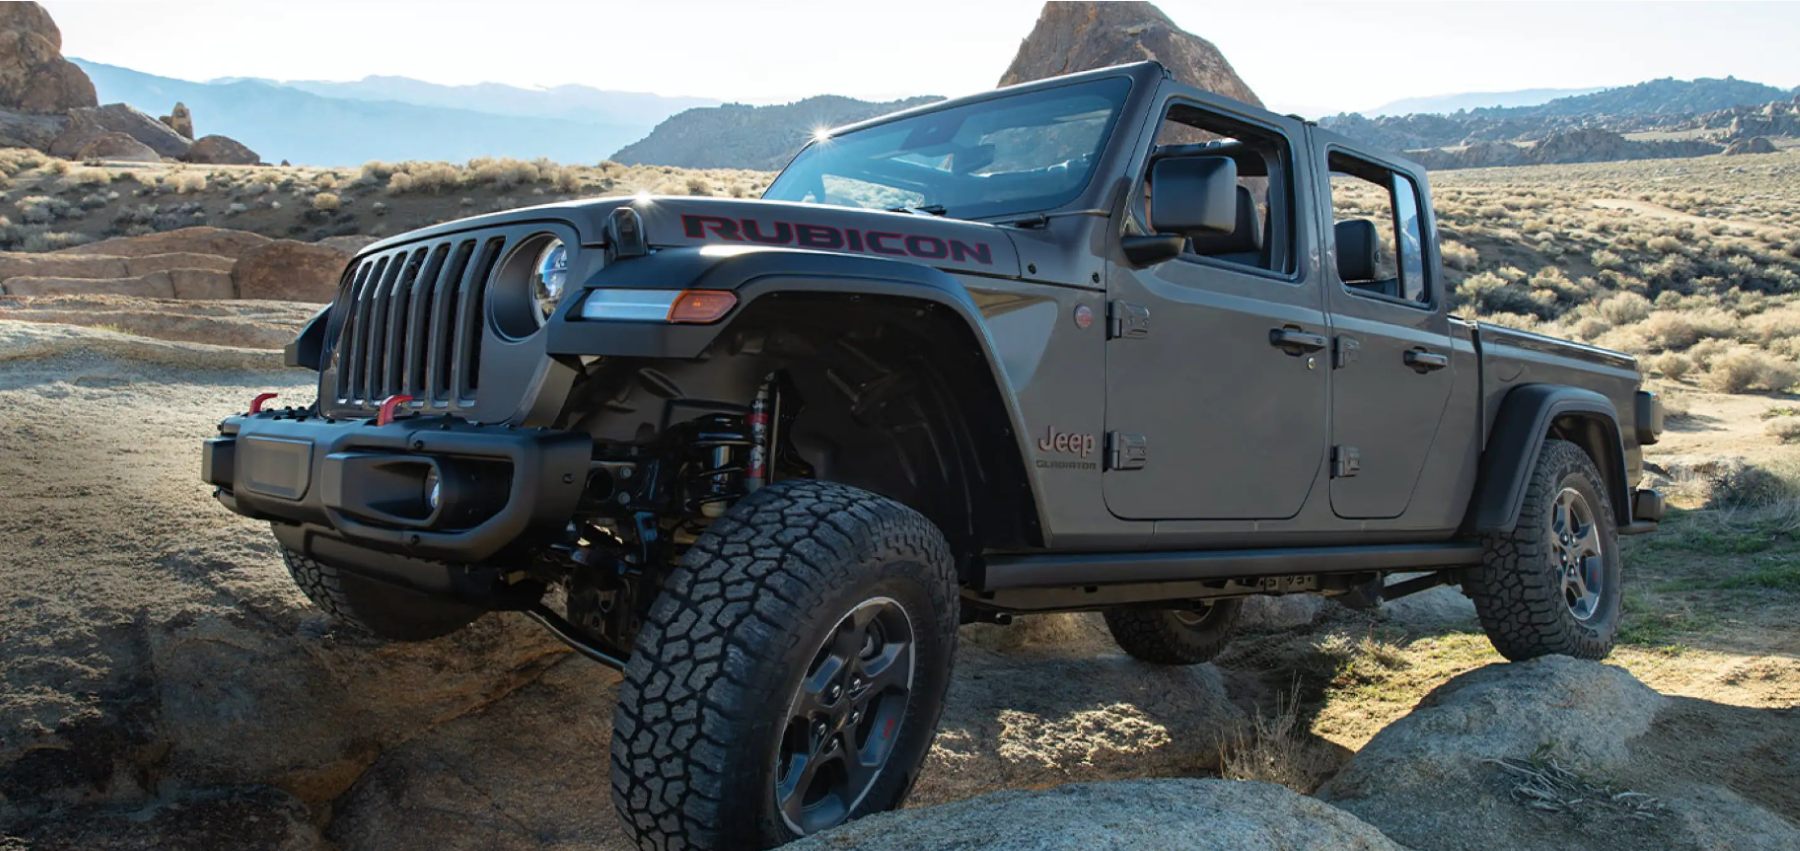 A 2022 Jeep Gladiator Rubicon midsize pickup truck climbing over rocks and boulders off-road